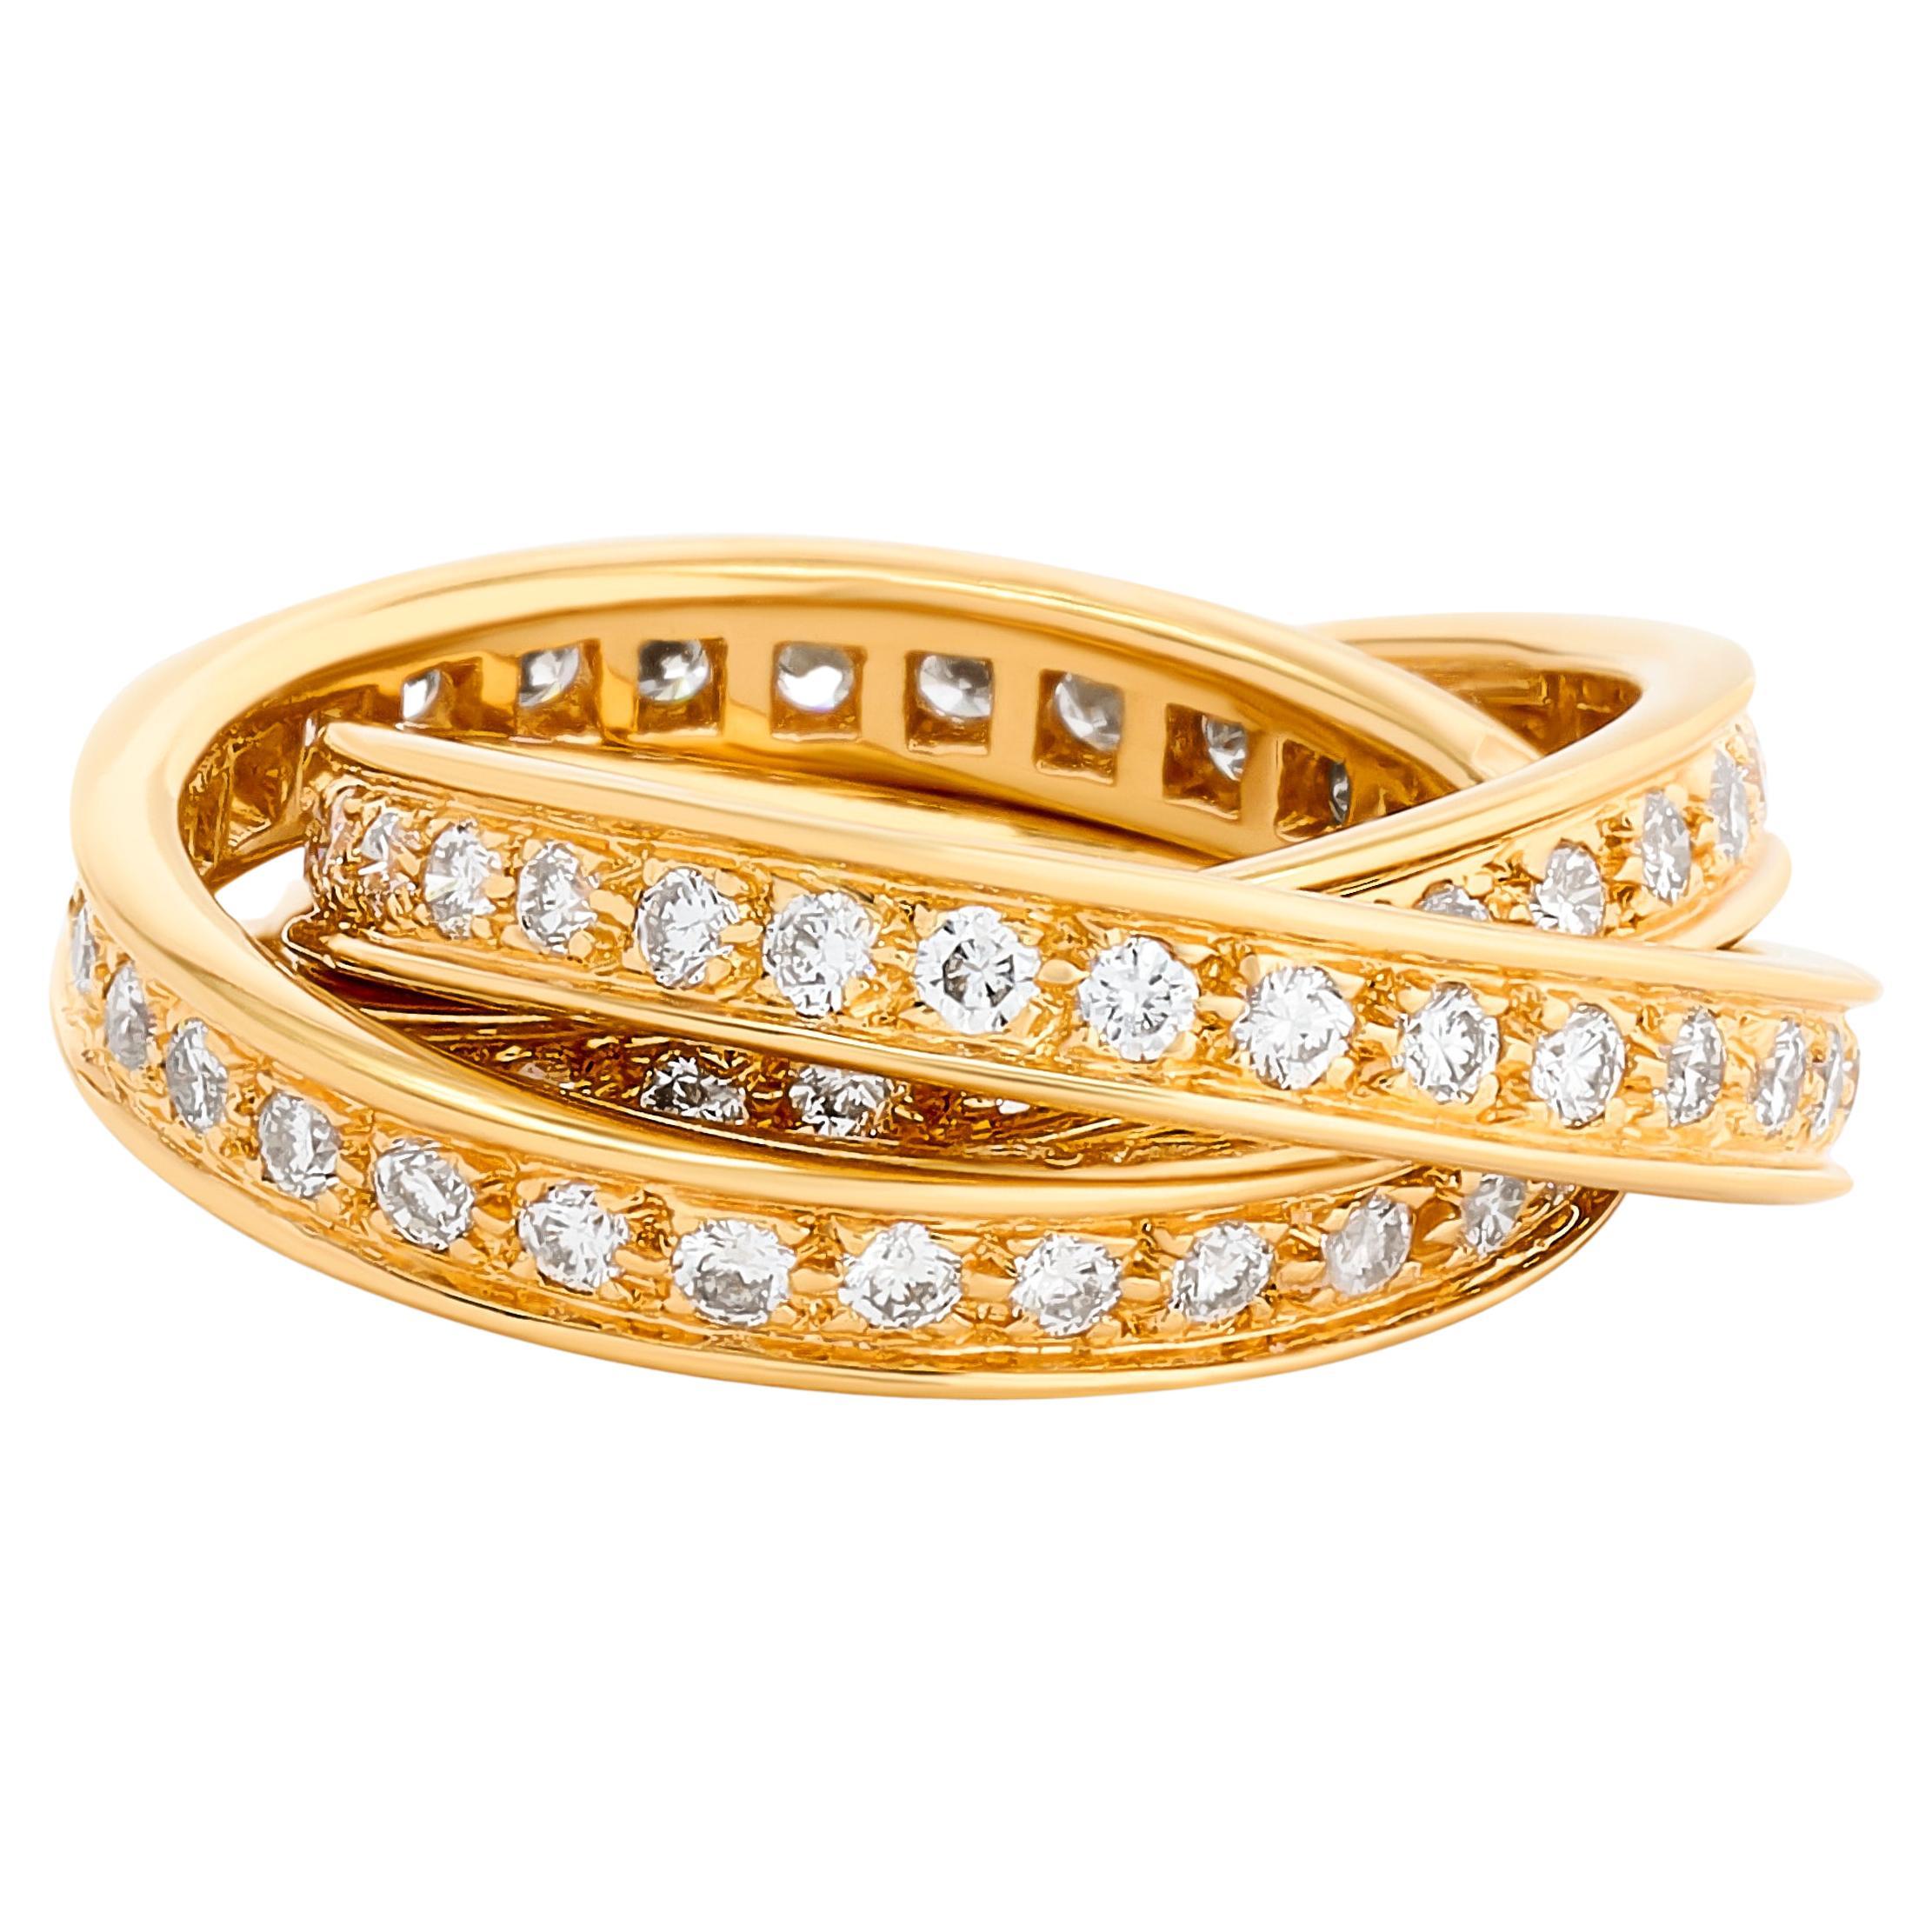 Cartier Classic Modell Diamant Trinity Rolling Ring in 18k Gelbgold